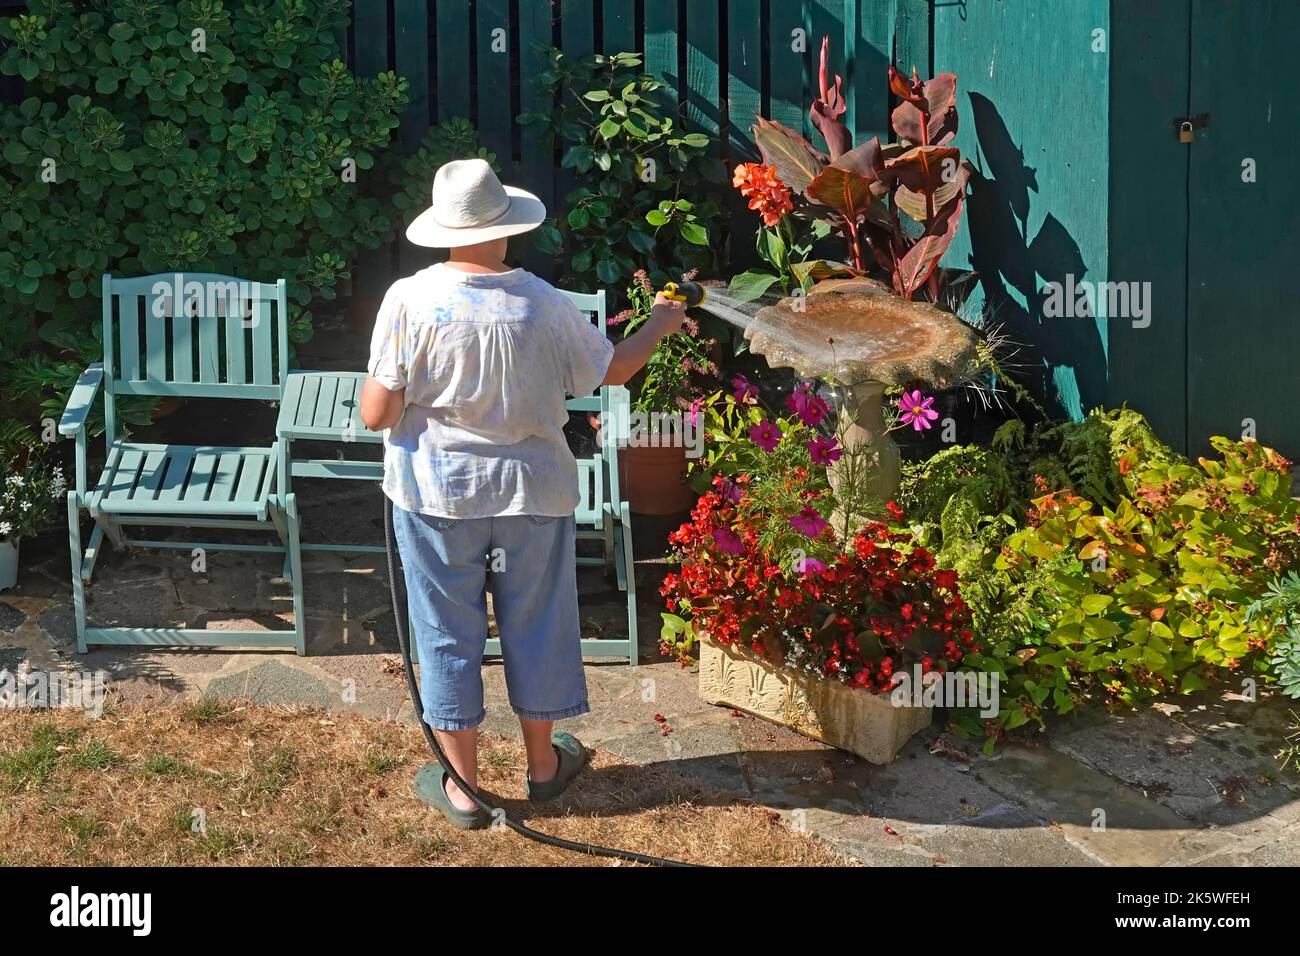 Senior mature woman gardener back view cleaning topping up water at ornamental back garden birdbath caring for birds during hot dry summer weather UK Stock Photo